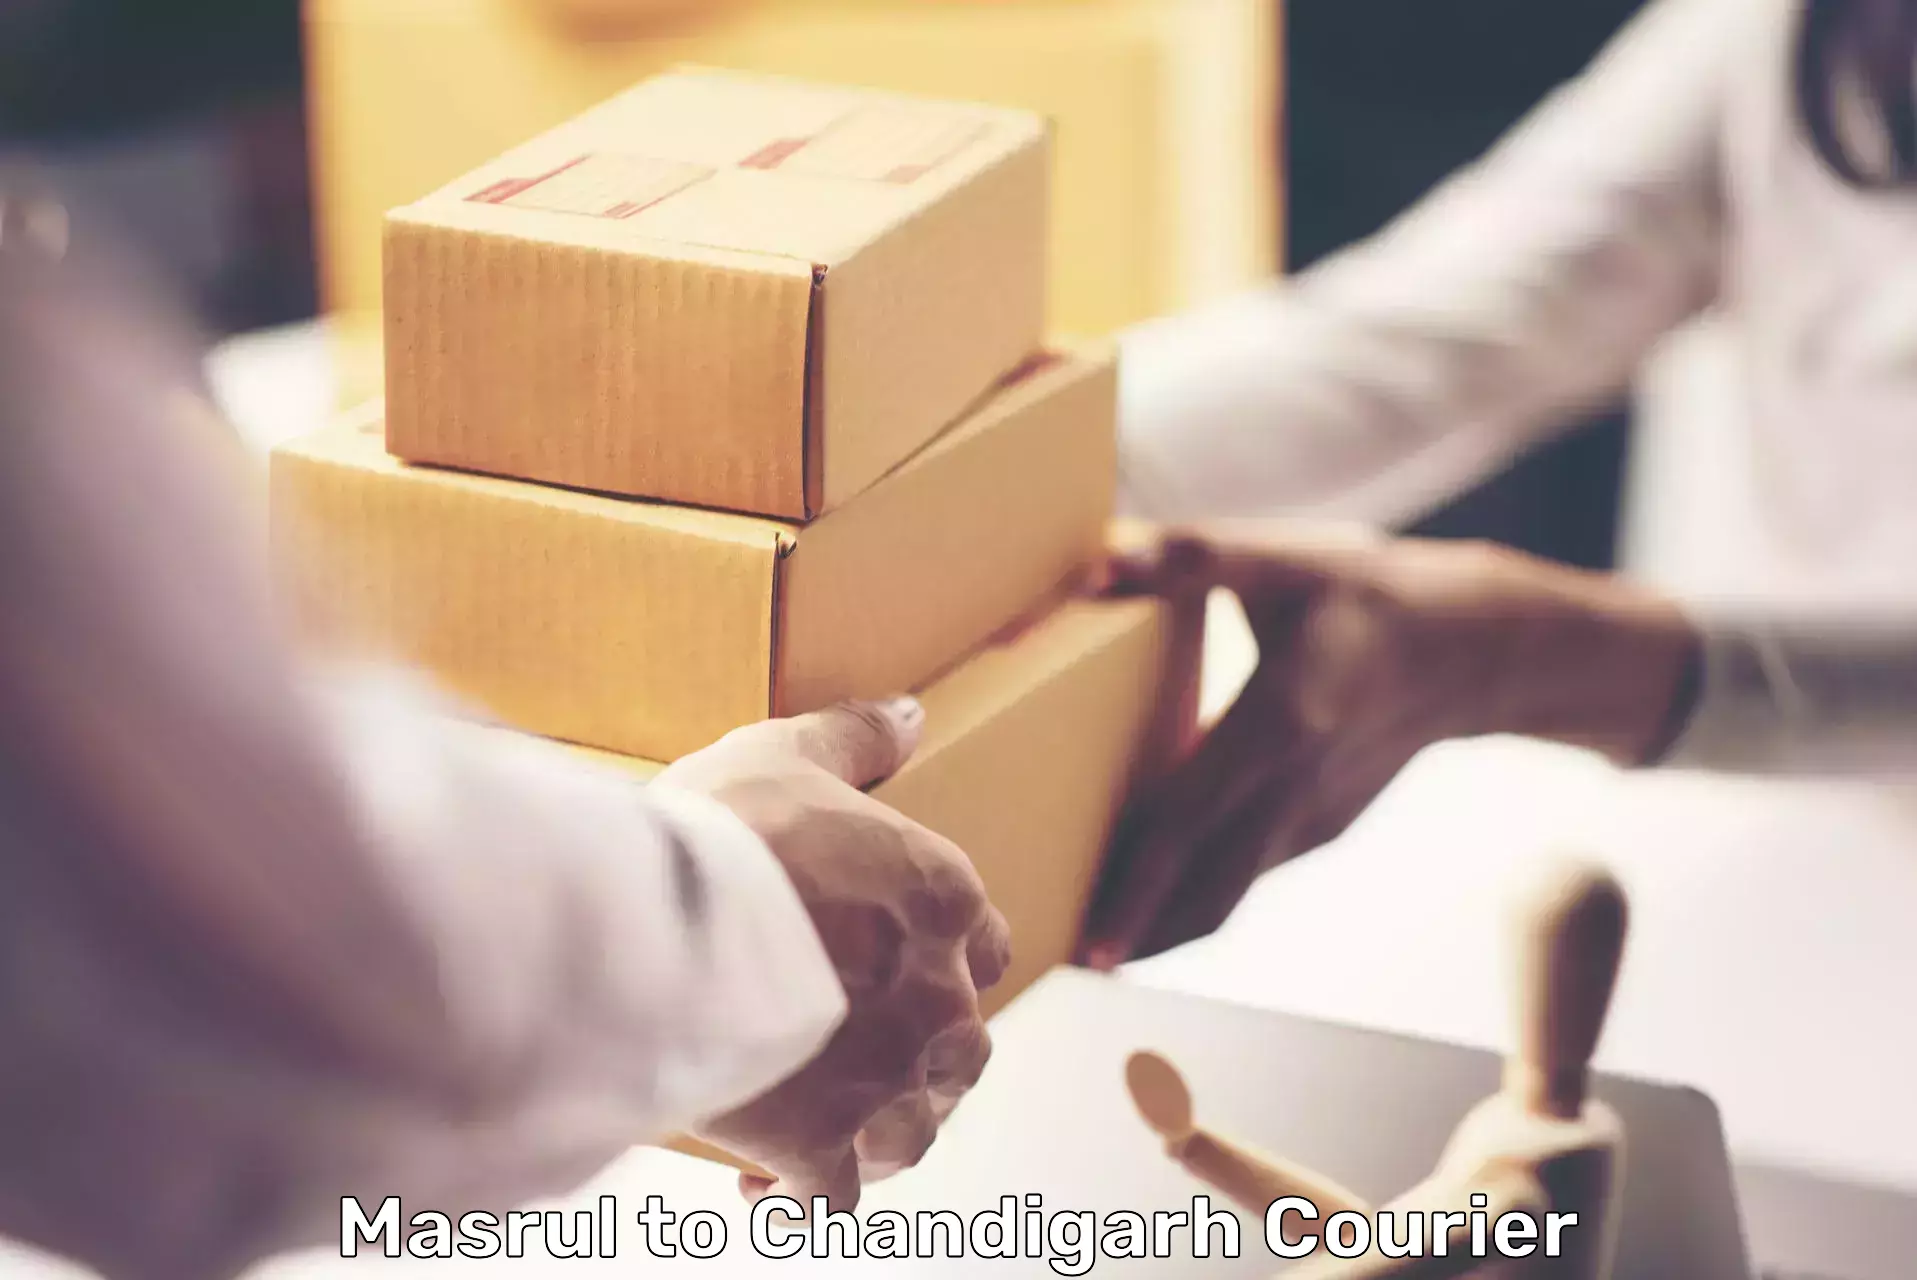 Global courier networks Masrul to Chandigarh